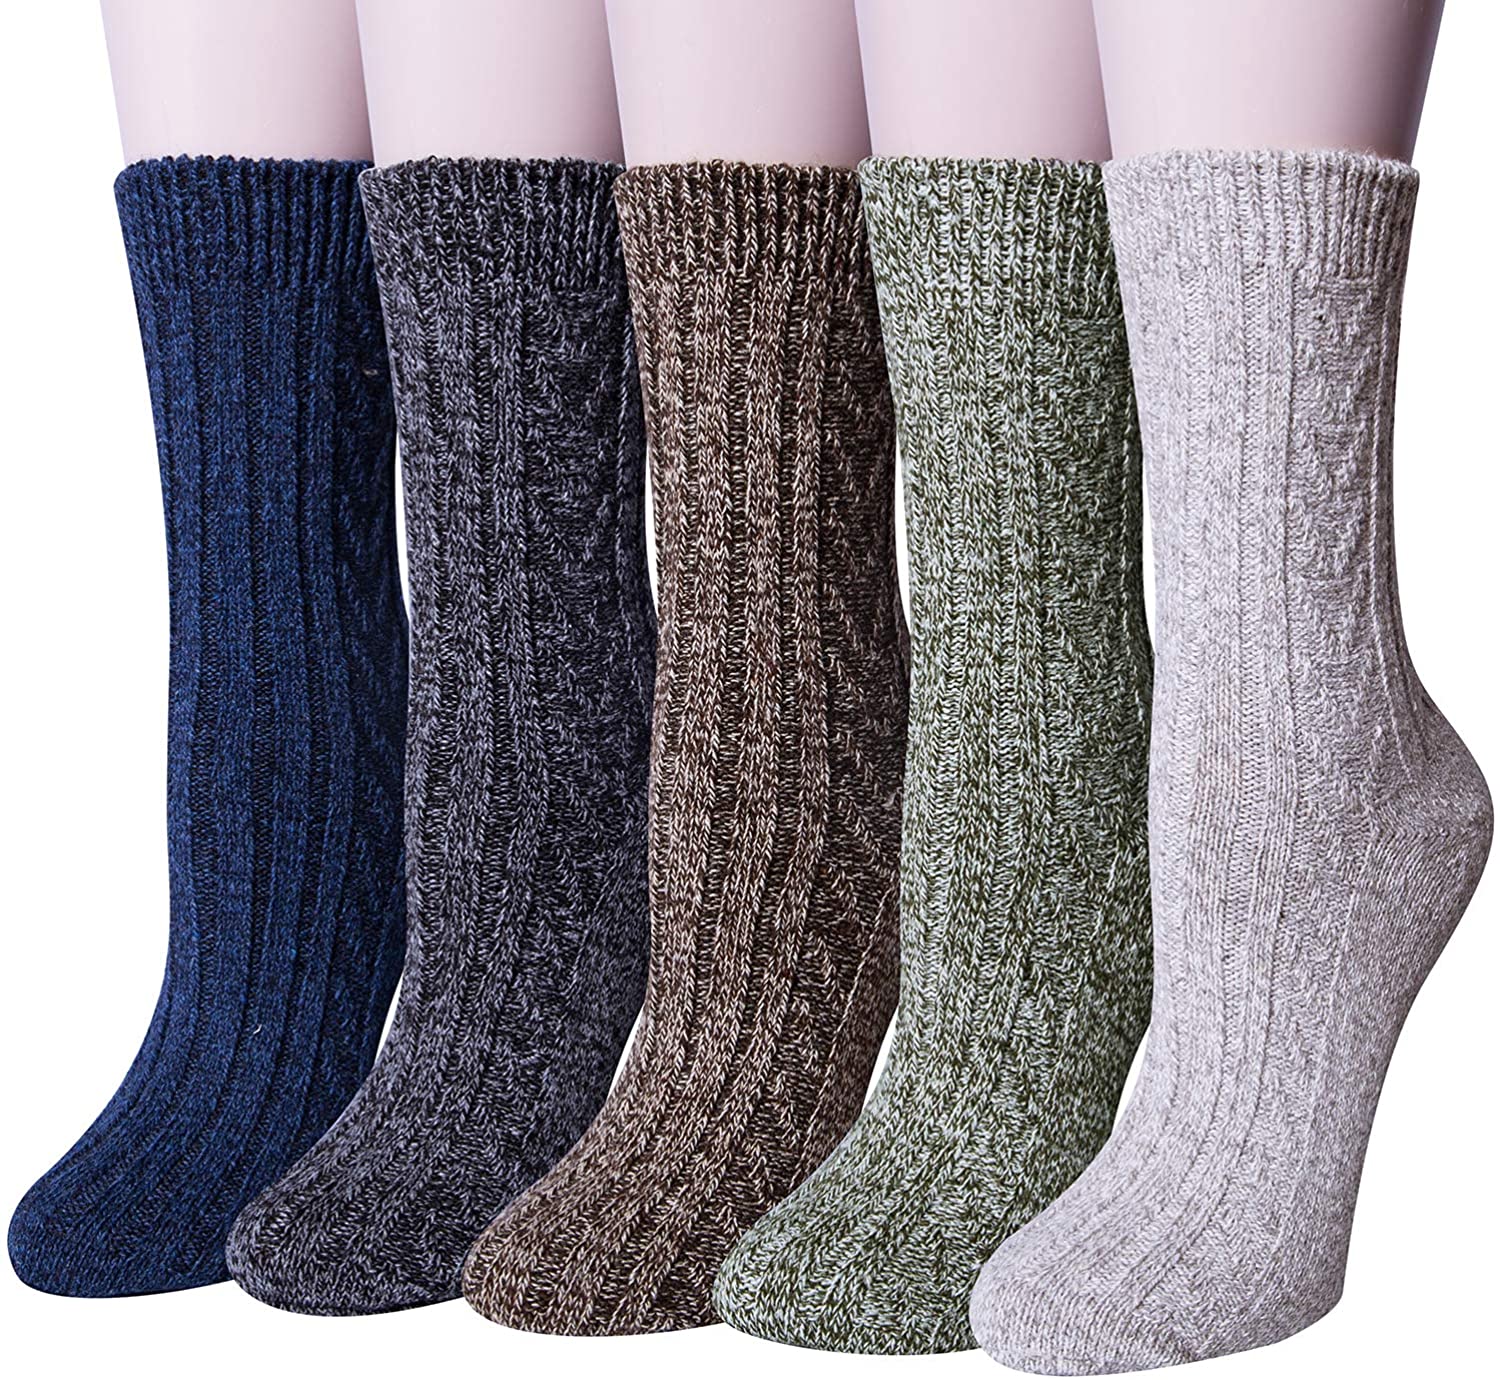 Pack of 5 Womens Winter Socks Warm Thick Knit Wool Soft Vintage